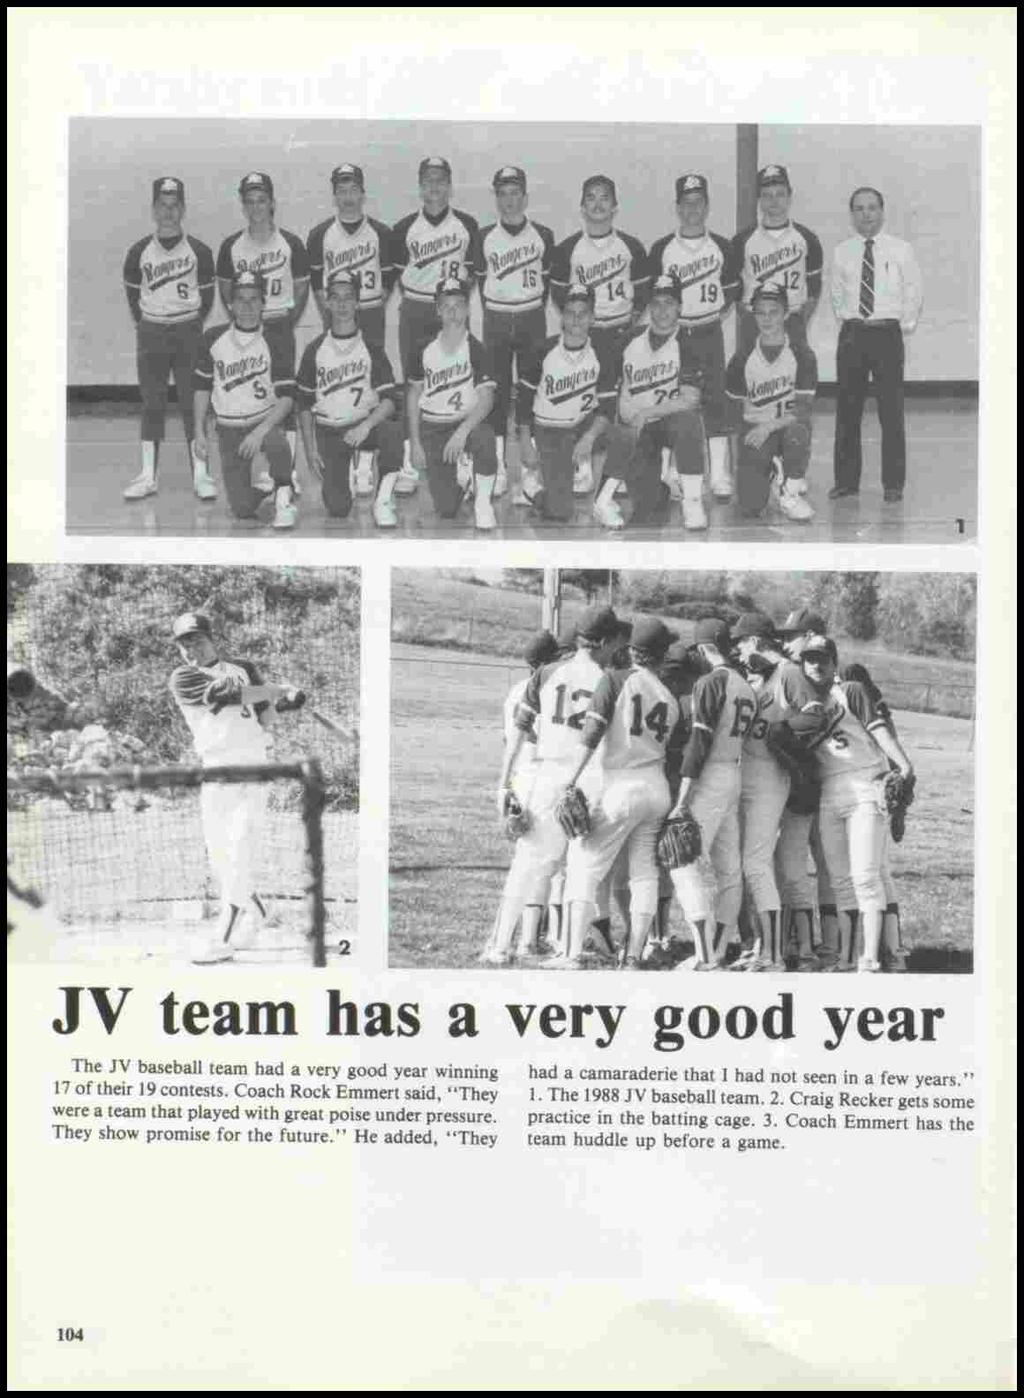 JV team has a very good year The JV baseball team had a very good year winning 17 of their 19 contests. Coach Rock Emmert said, ''They were a team that played with great poise under pressure.